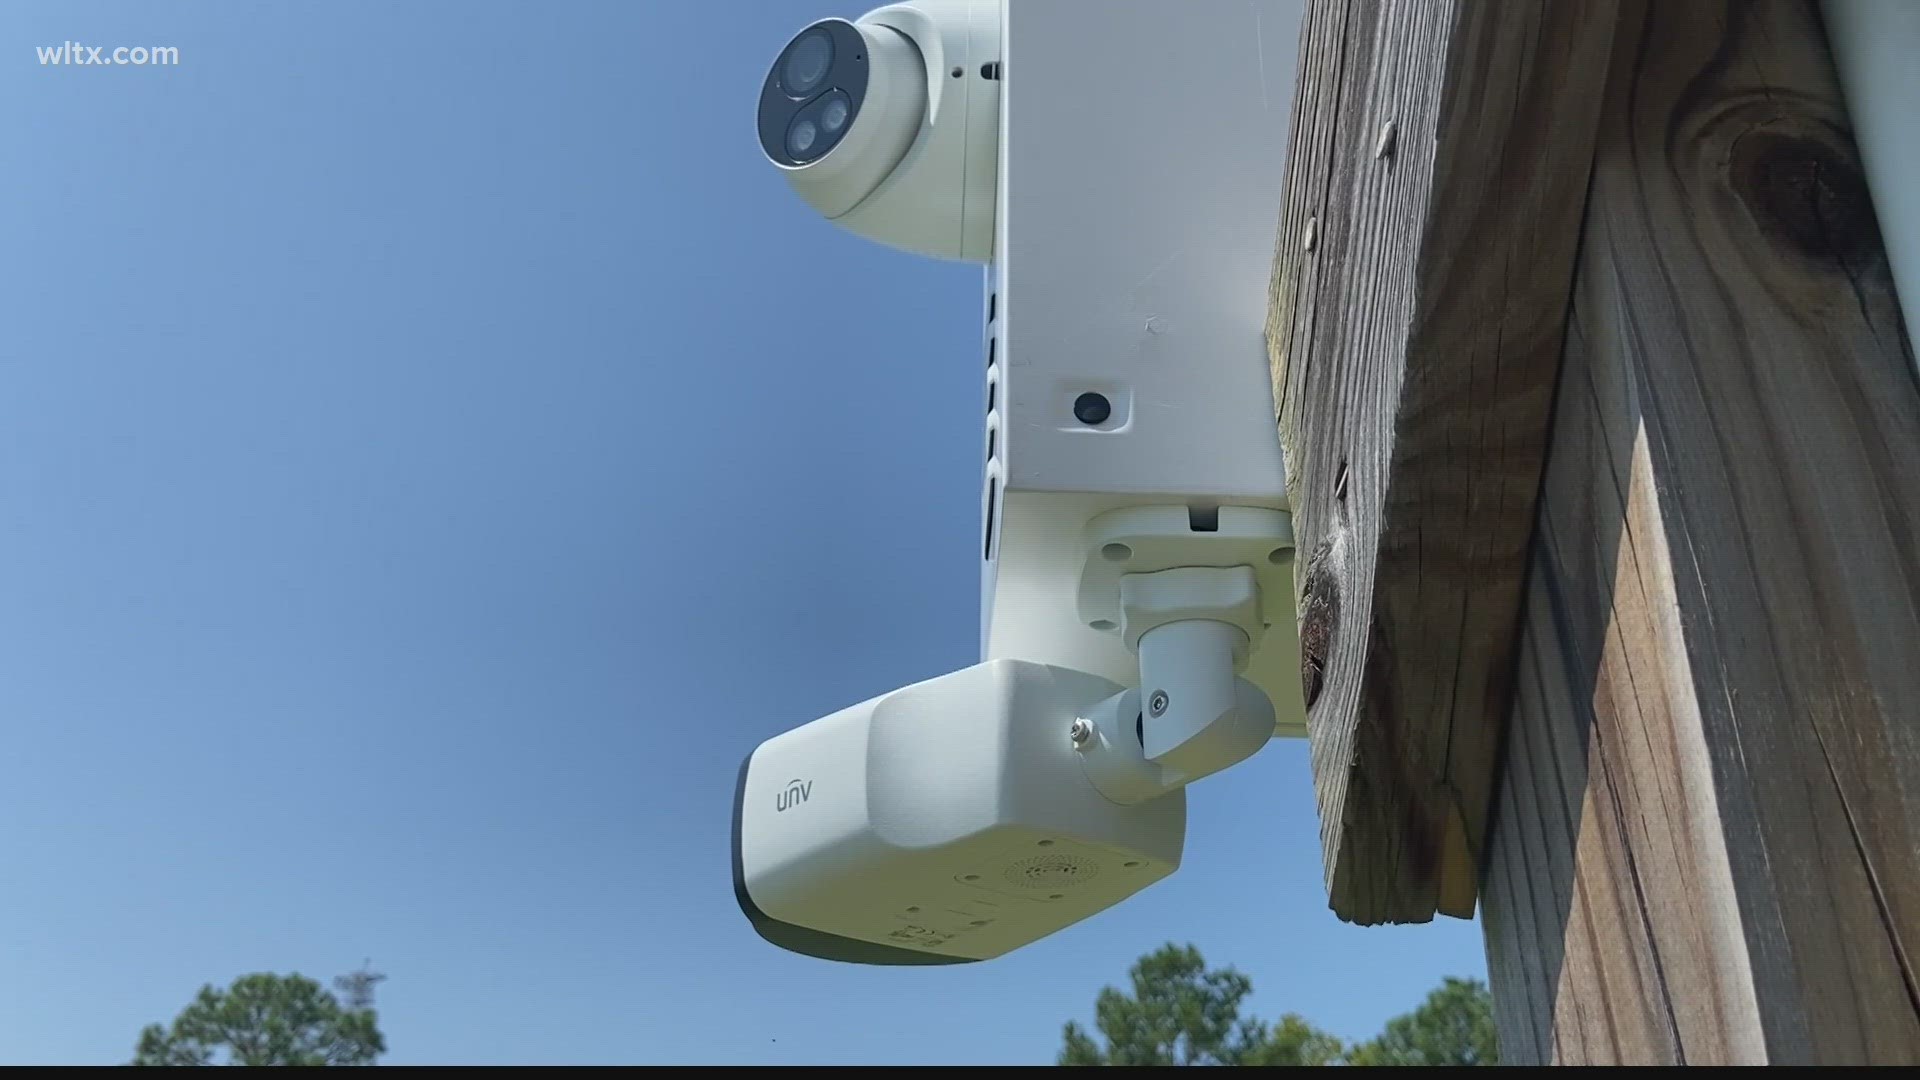 New police cameras have been installed near intersections and schools in Elgin.